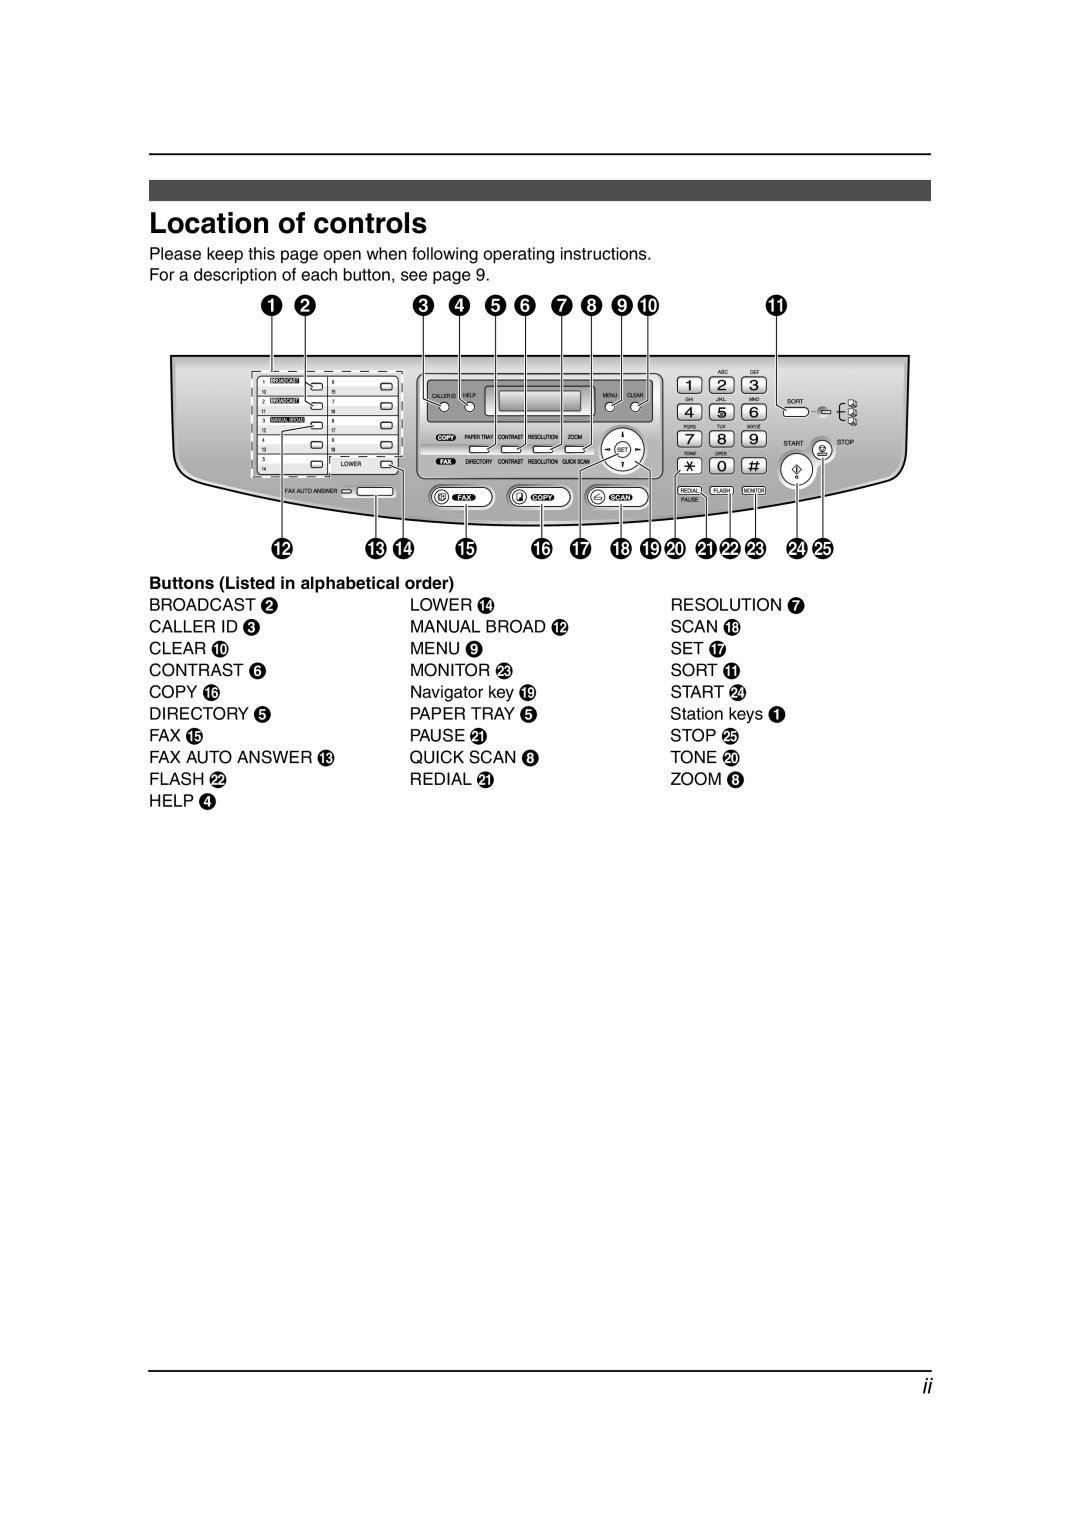 Panasonic KX-FLB851 manual Location of controls, Buttons Listed in alphabetical order 